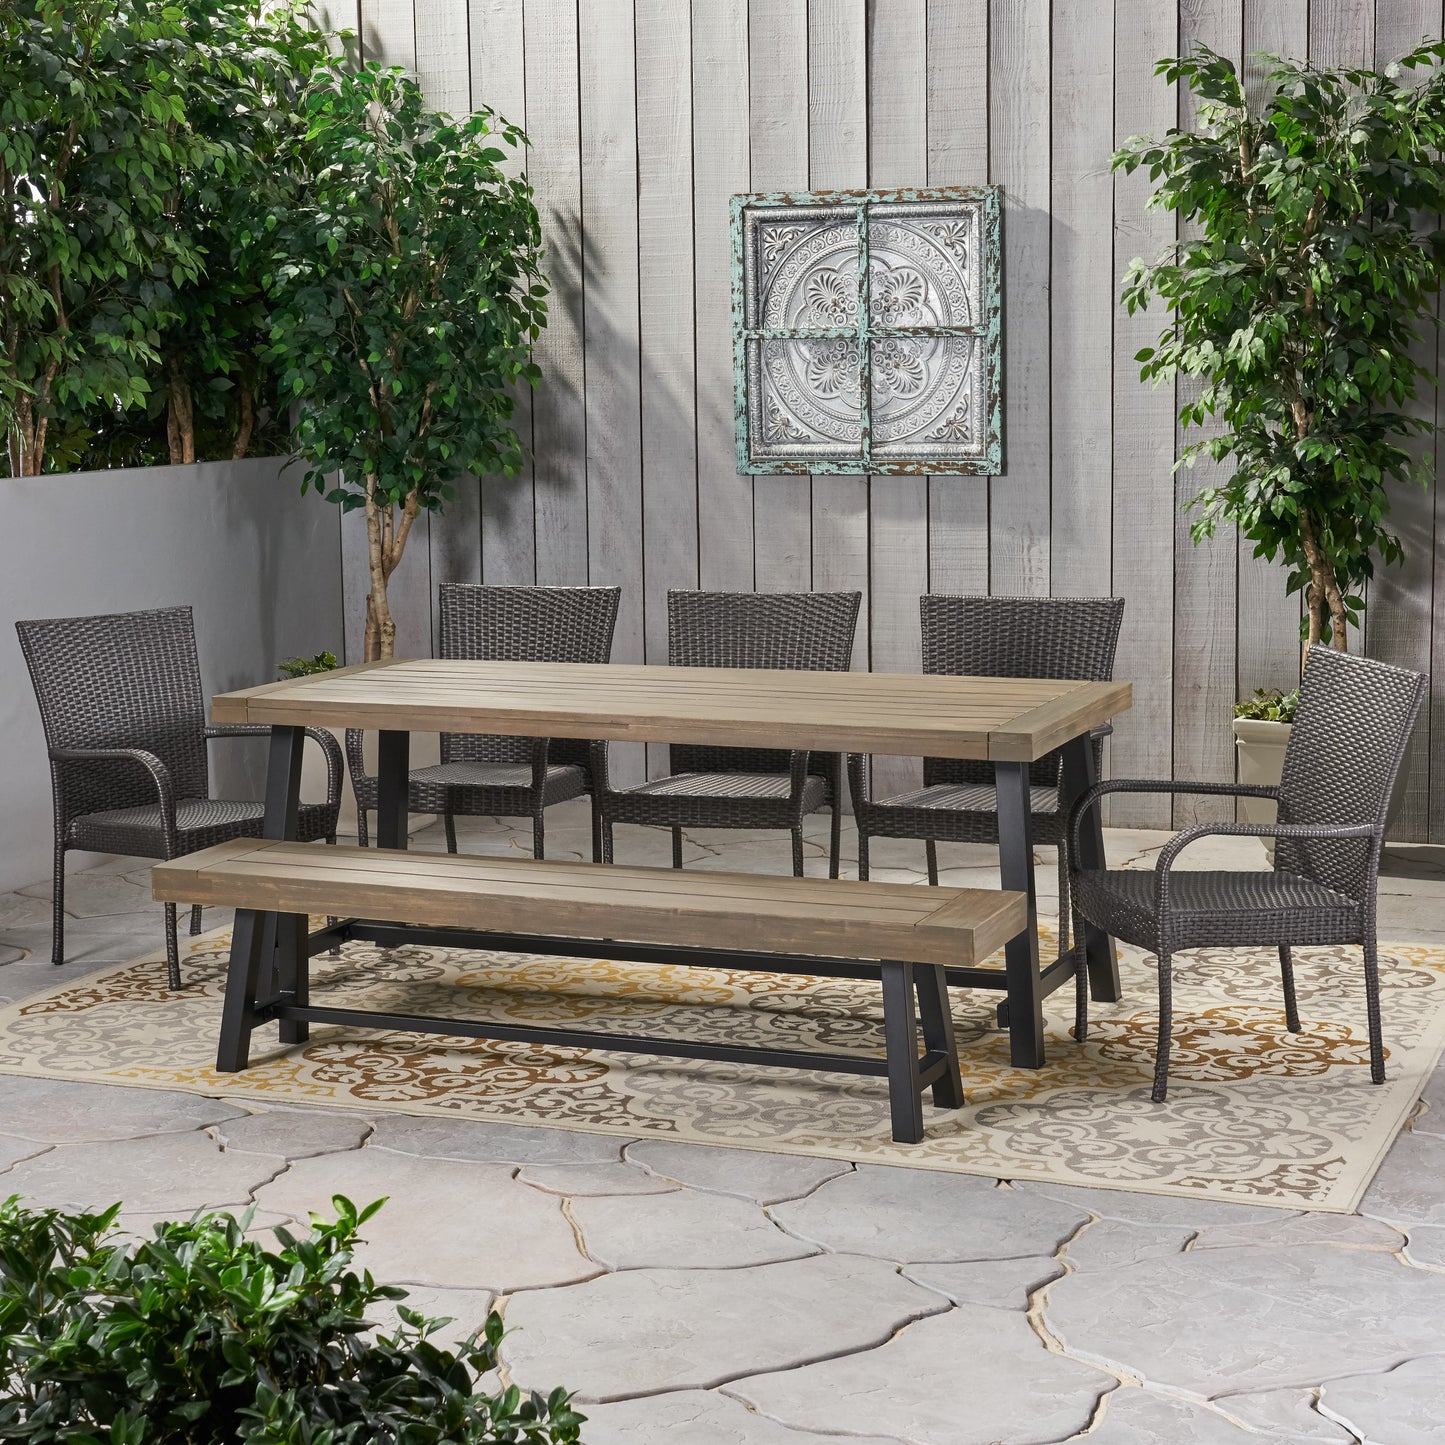 Gryphon Outdoor Rustic Acacia Wood 8 Seater Dining Set with Dining Bench